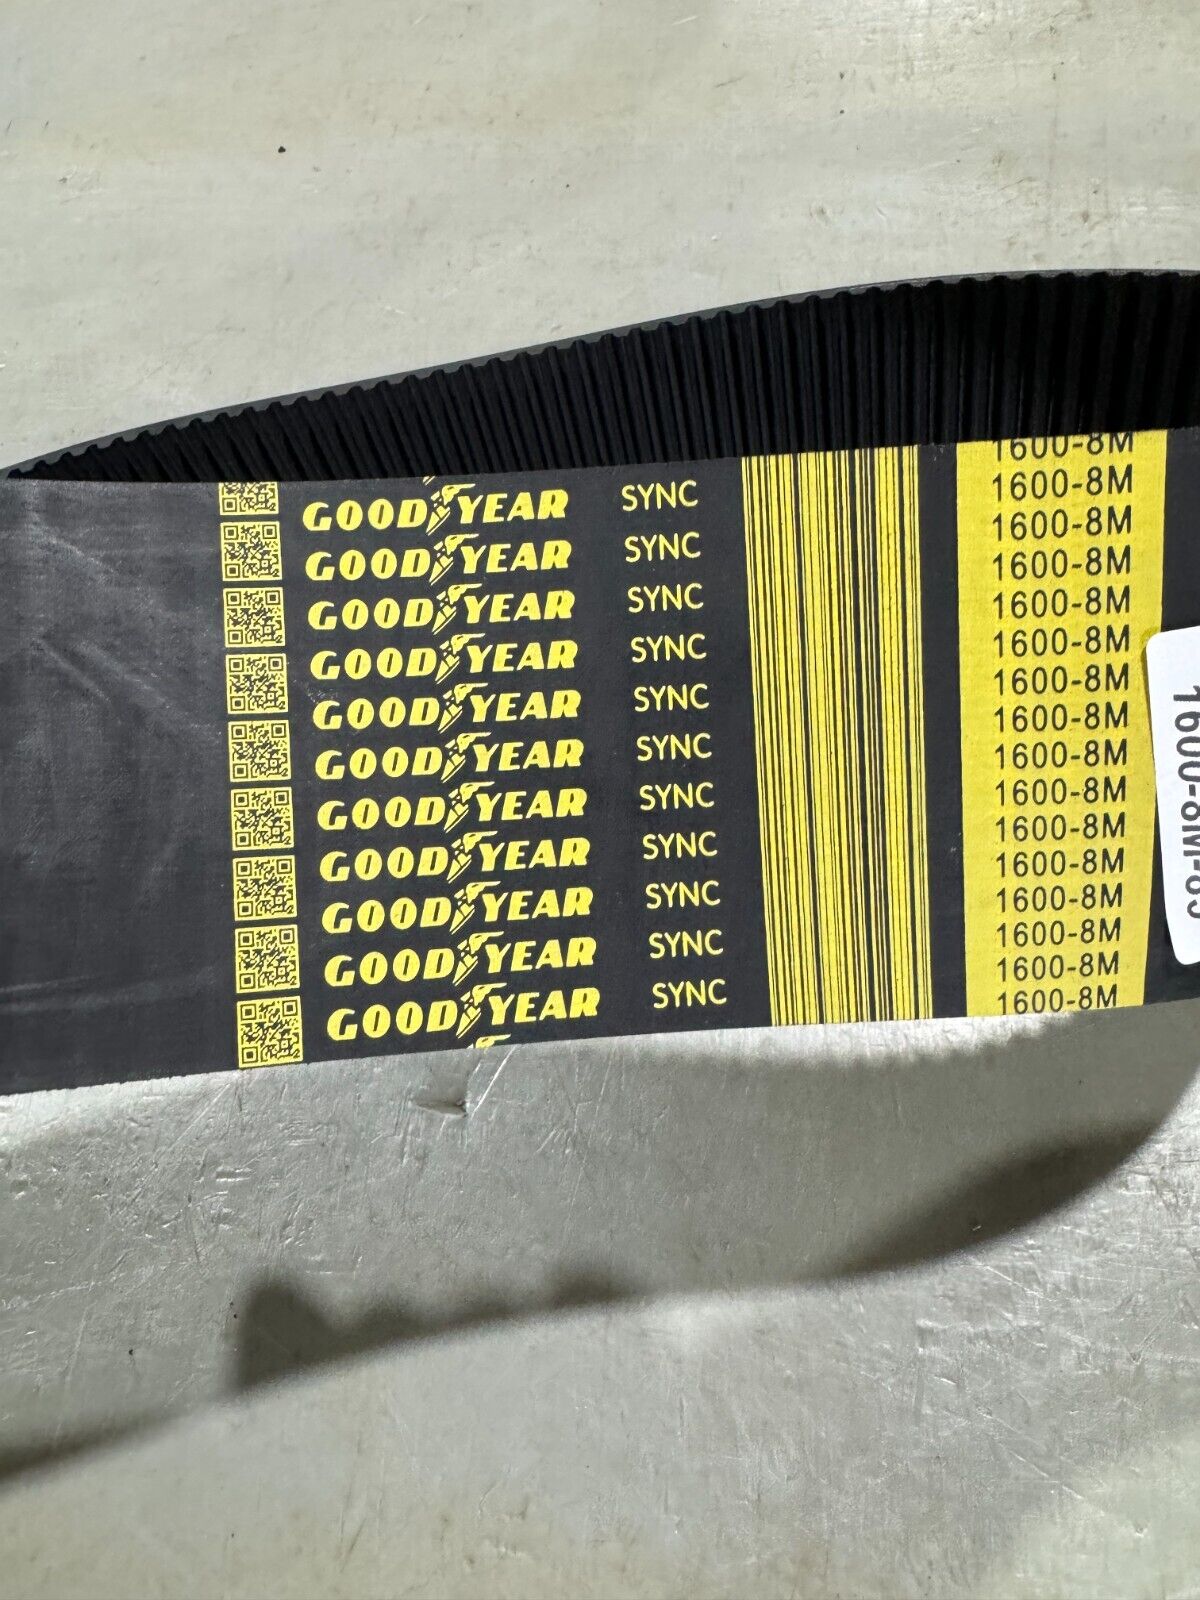 FACTORY NEW GOODYEAR SYNCHRONOUS SYNC RPP TIMING BELT 1600-8M-85